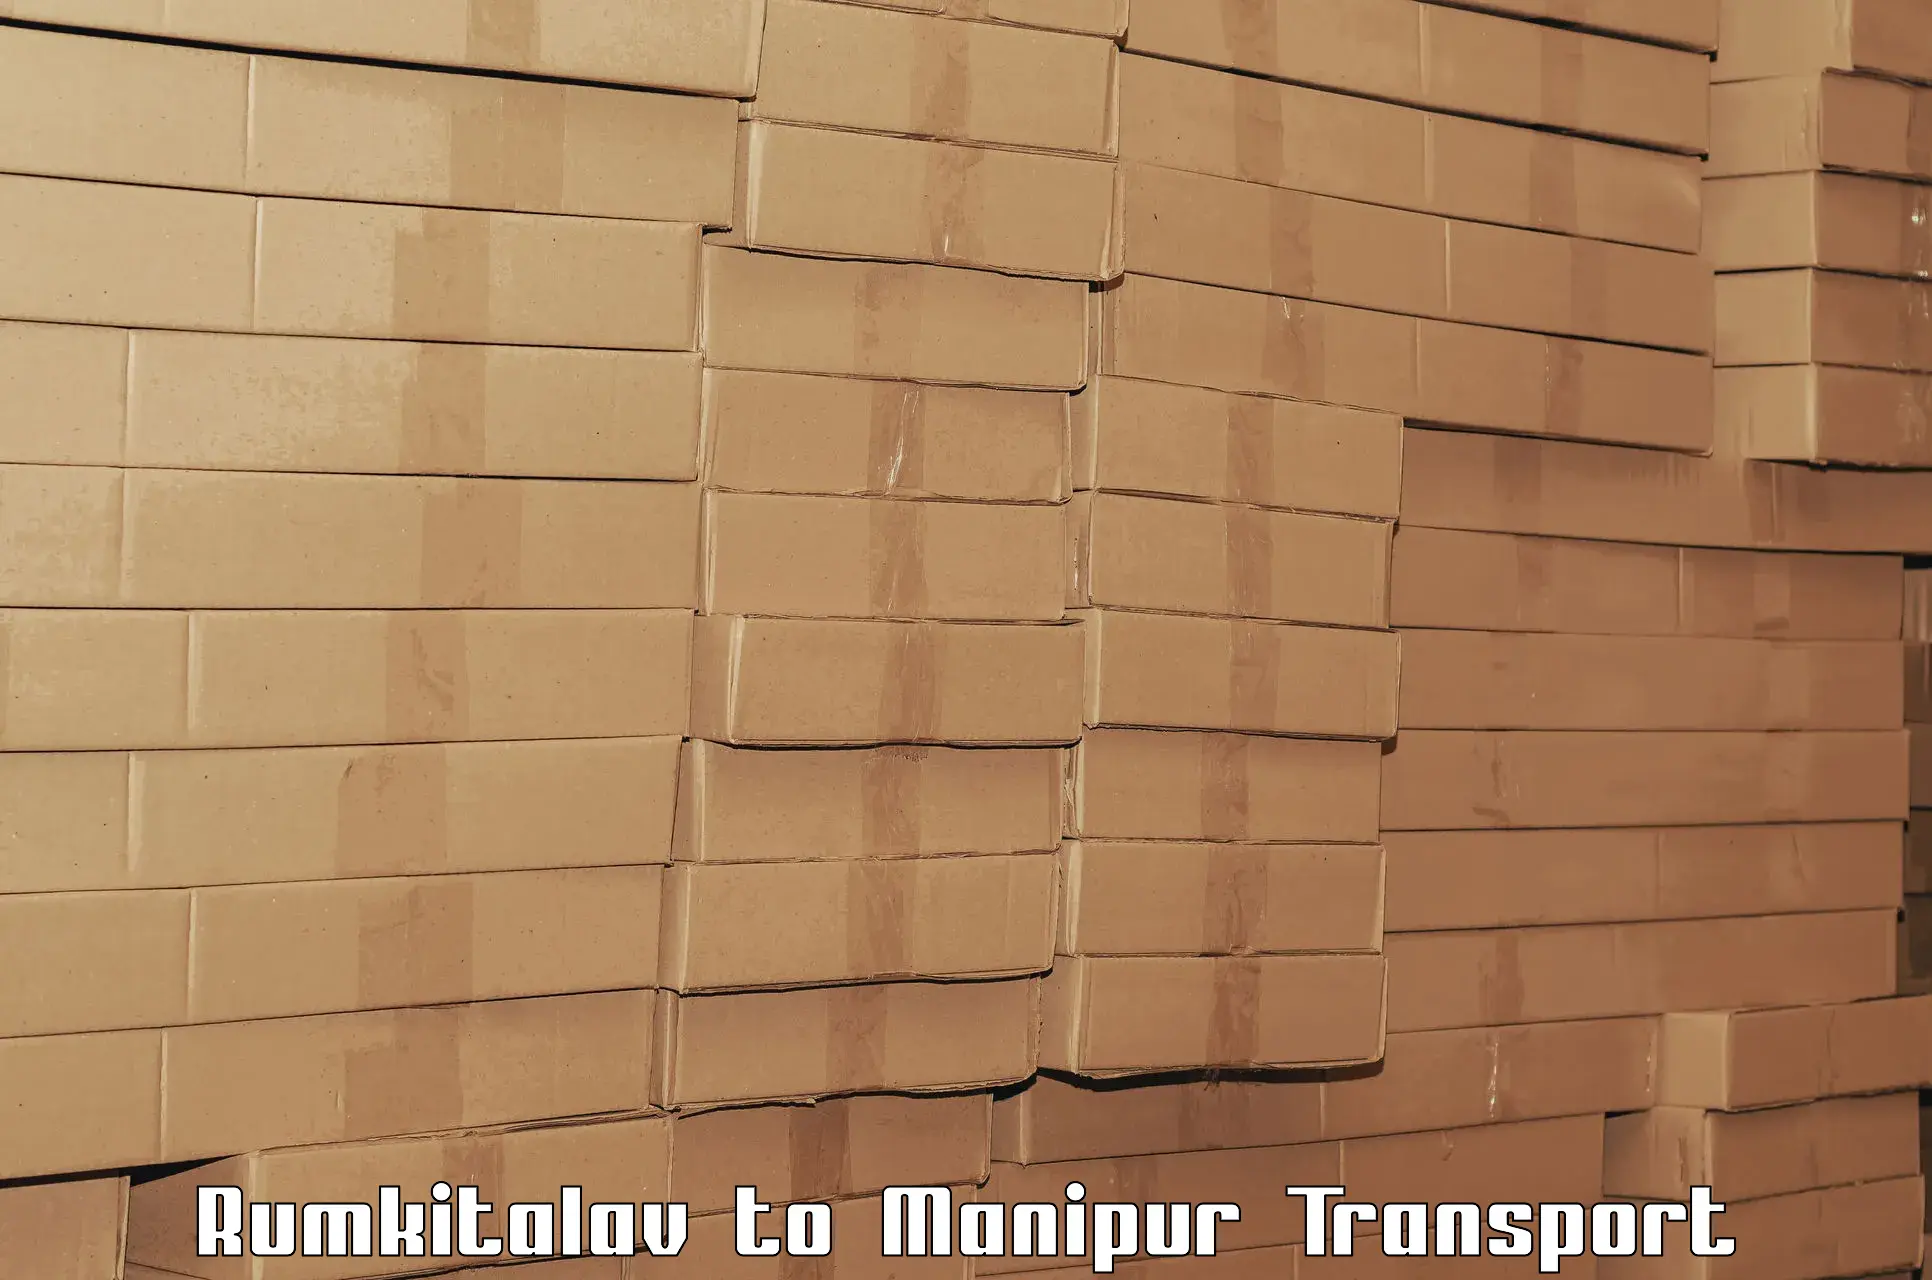 Container transport service Rumkitalav to Manipur